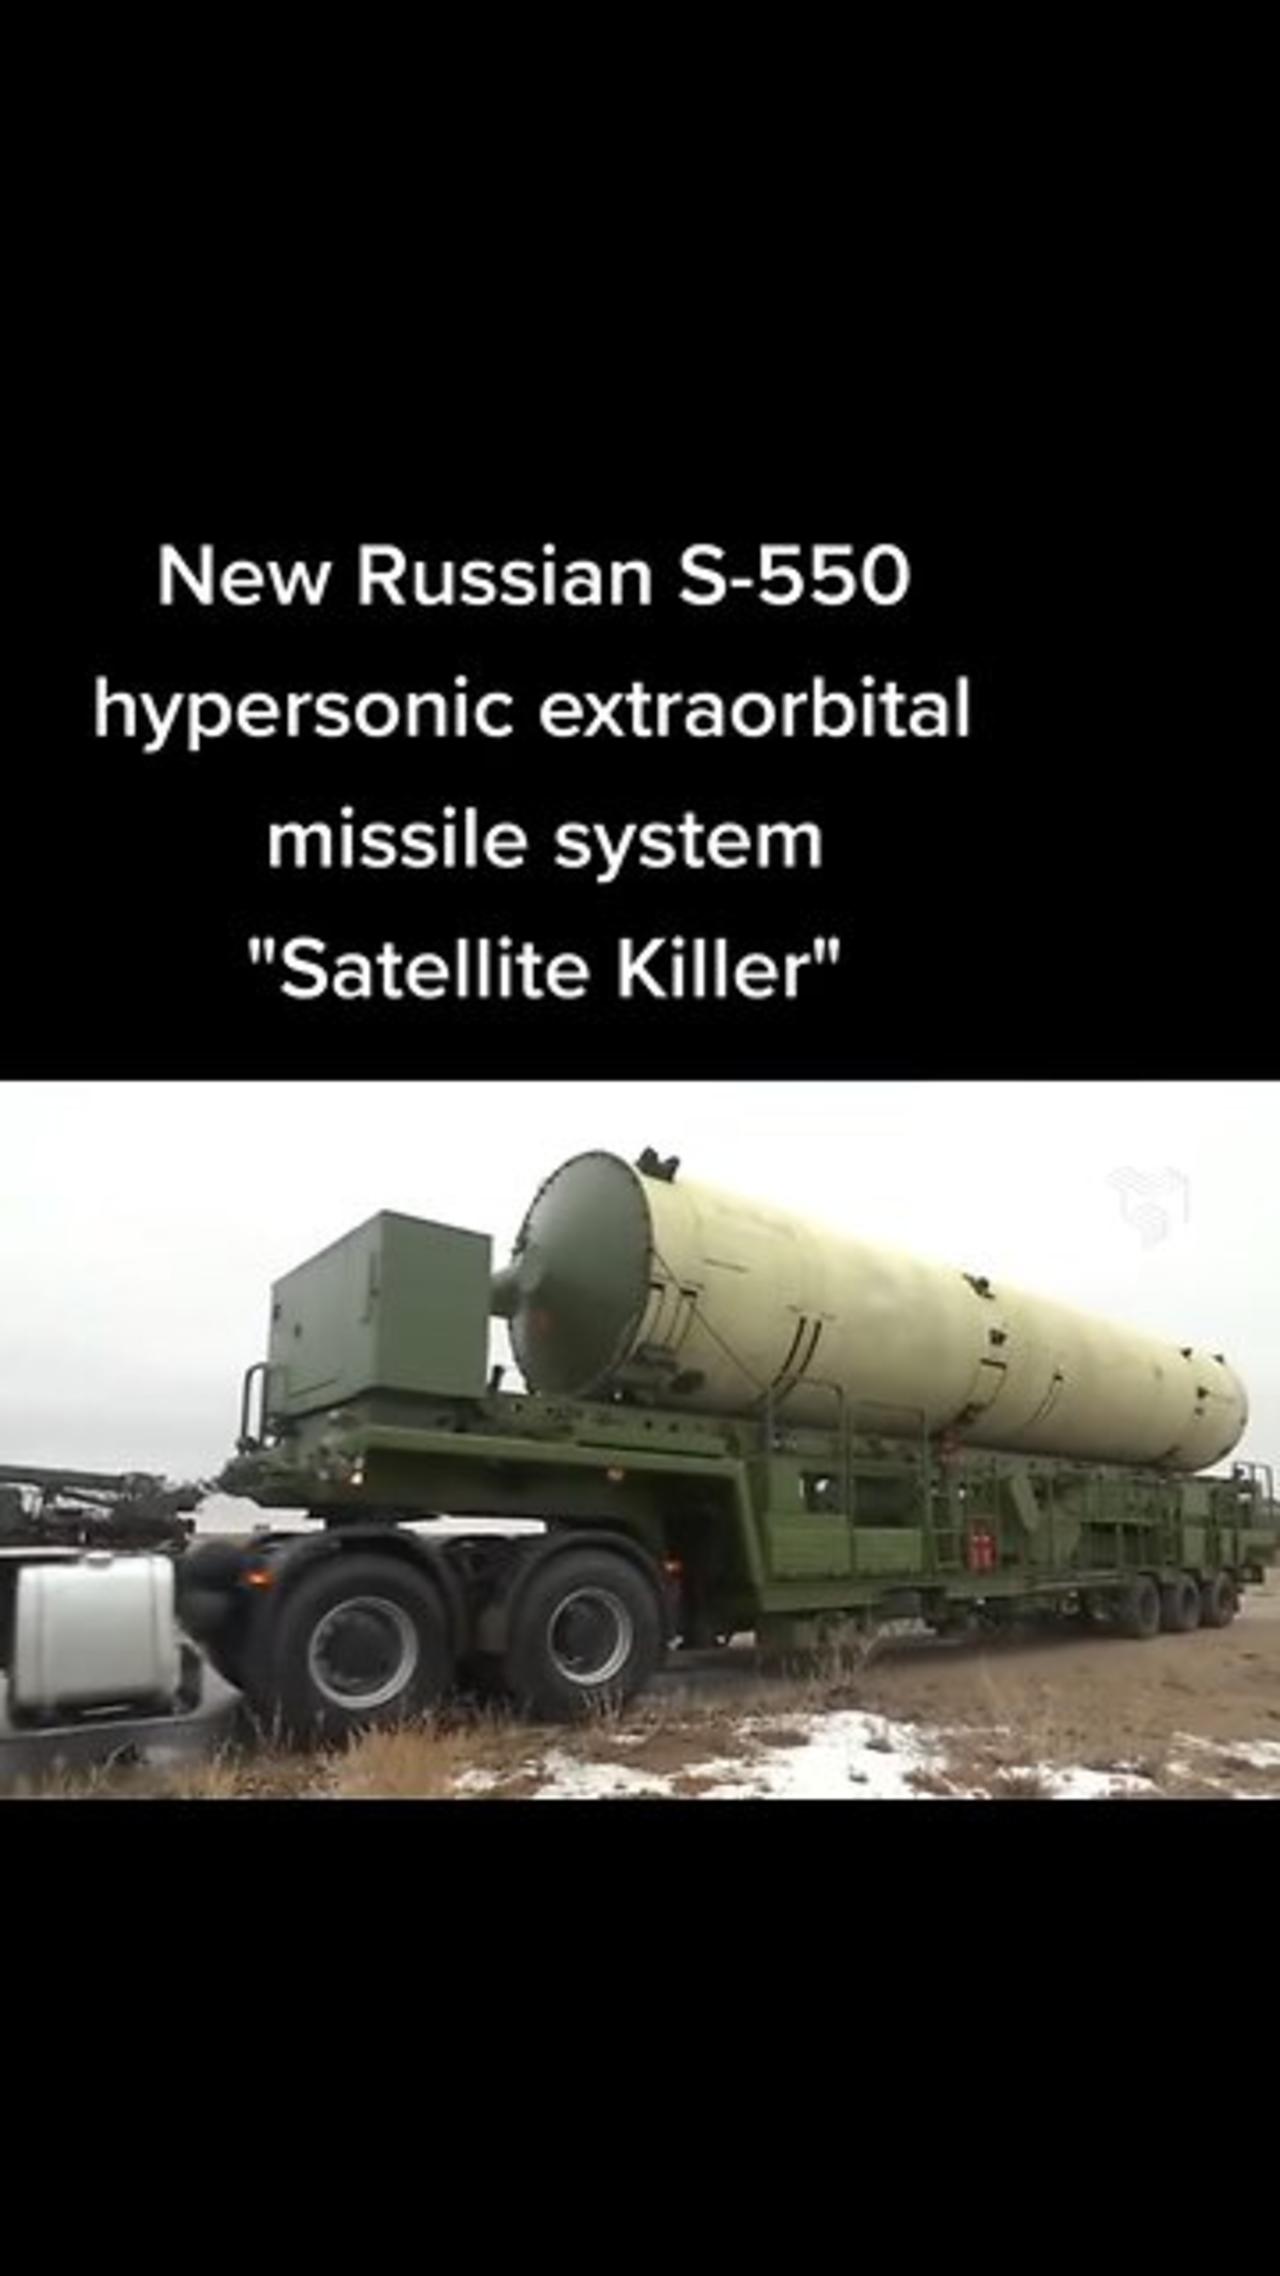 The new Russian S-550 hypersonic extraorbital missiles system - Satellite Killer